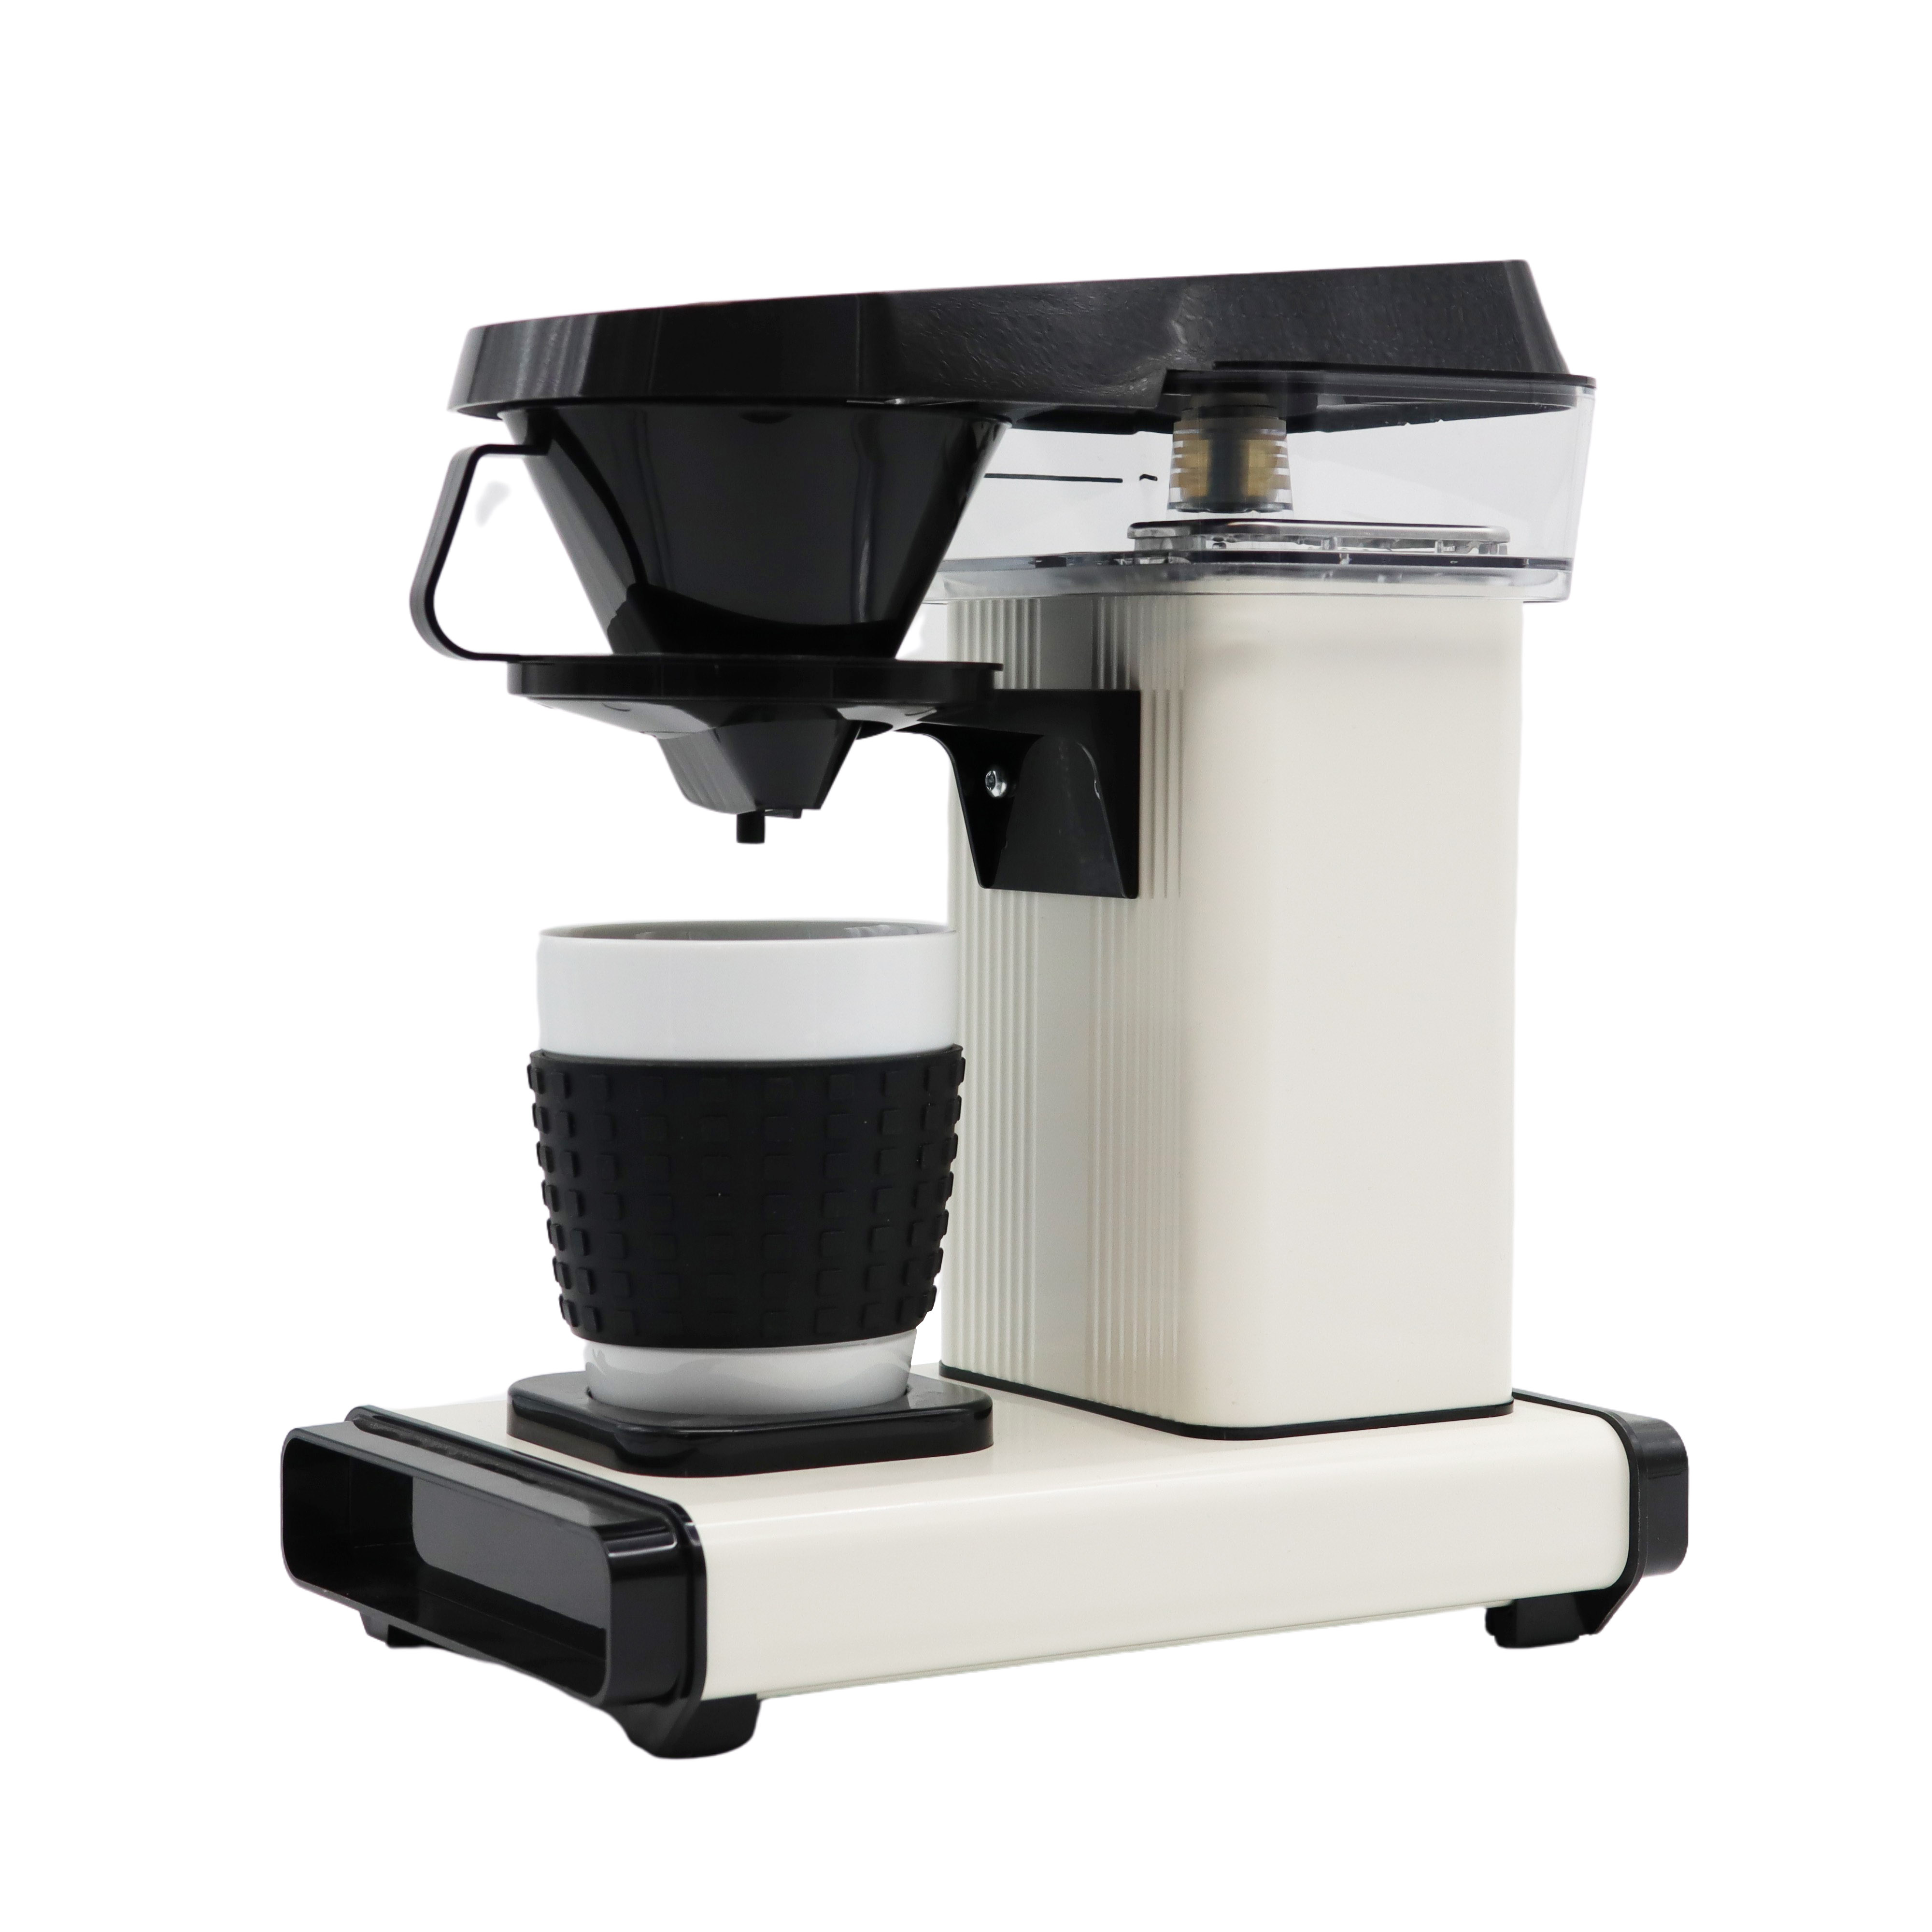 Moccamaster Cup-One Off-White 69218 inkl. 2 Tassen + 80 Filter No. 1